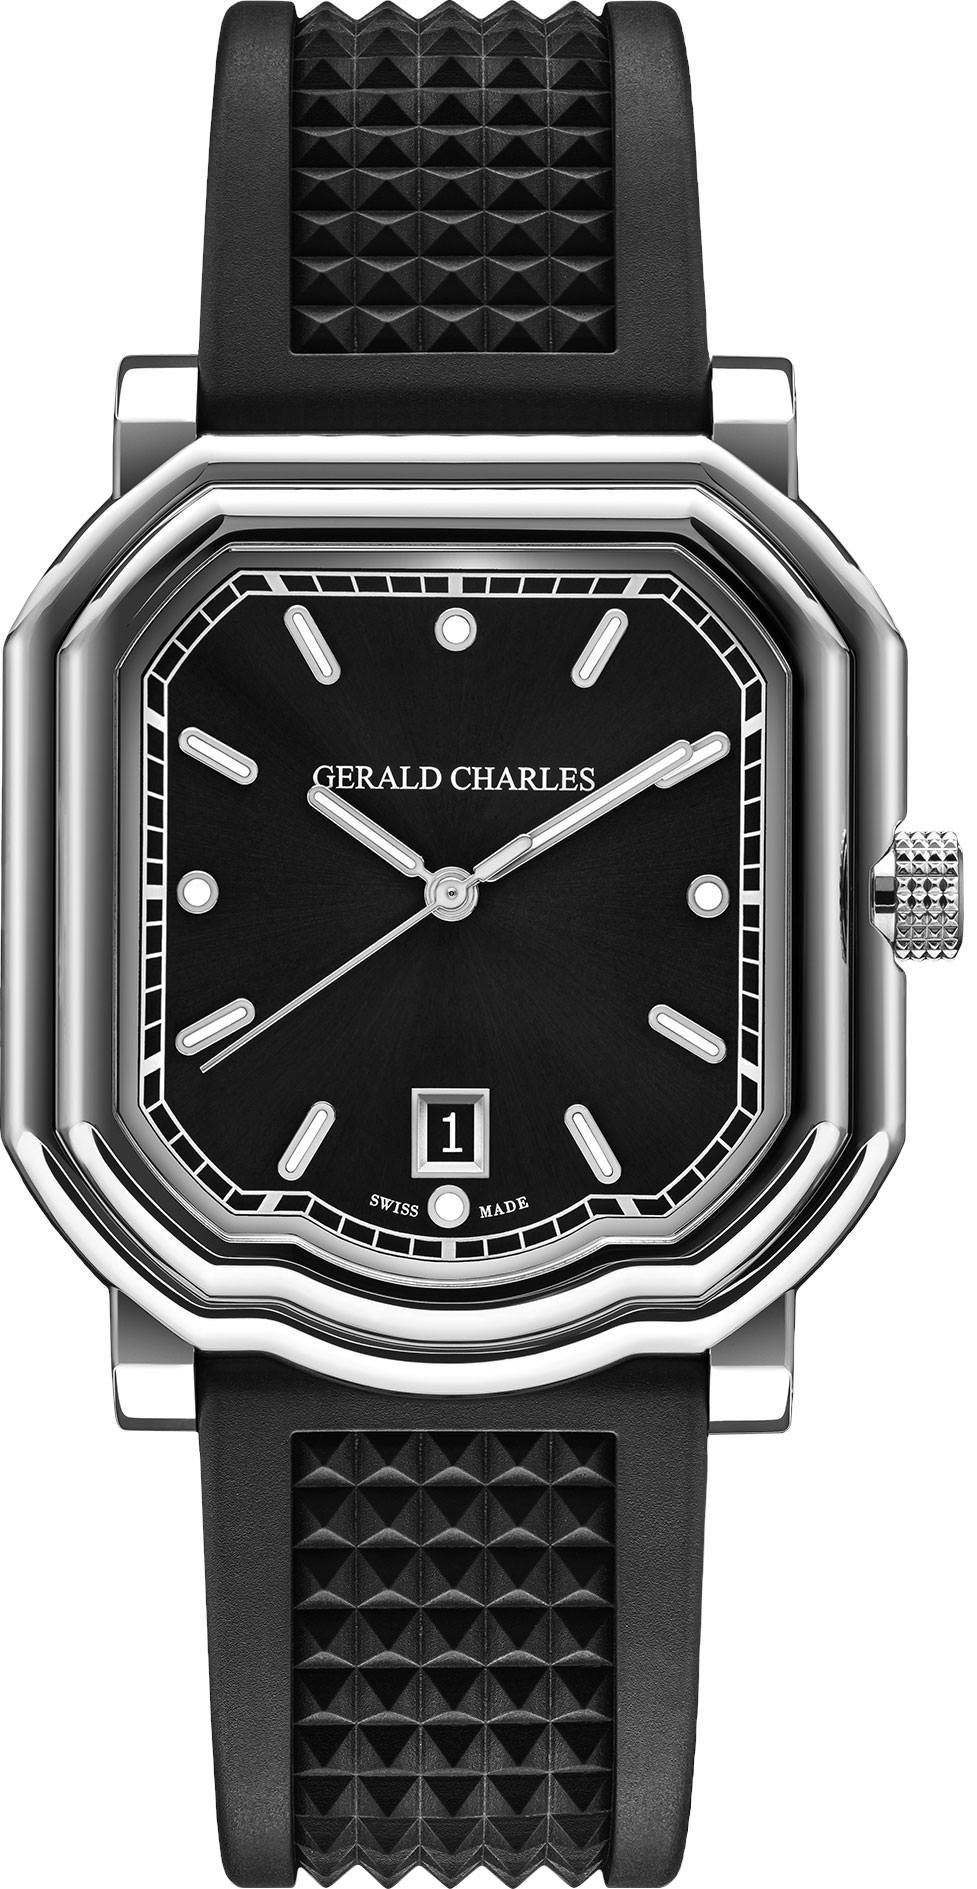 Gerald Charles Maestro Maestro 2.0 Ultra-Thin Black Dial 41.7 mm Automatic Watch For Unisex - 1